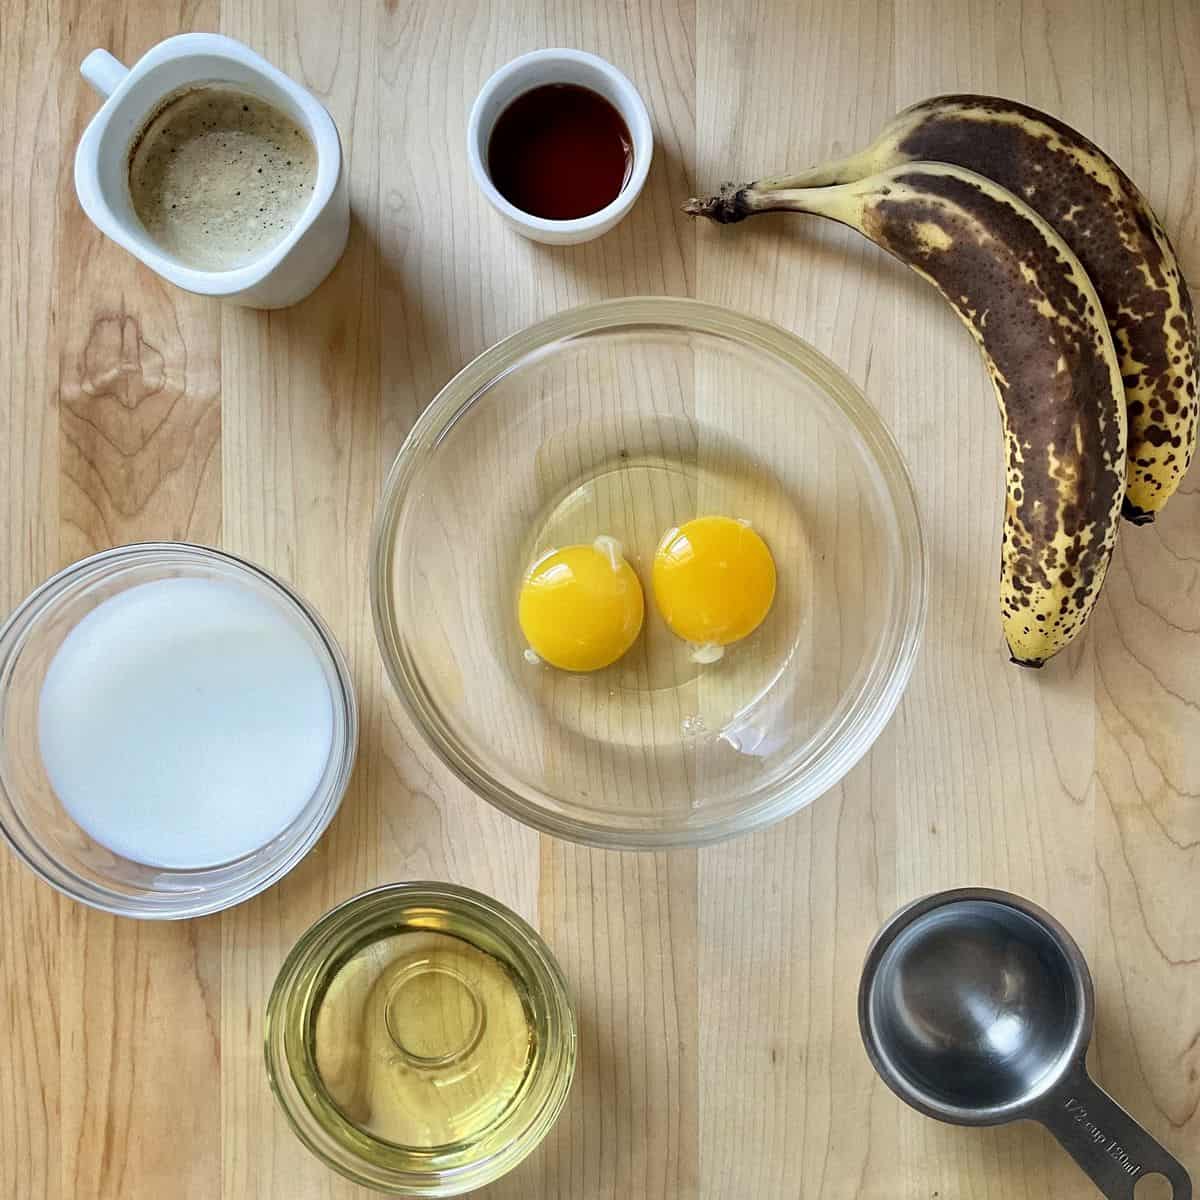 The wet and dry ingredients to make banana cake in a bowl.